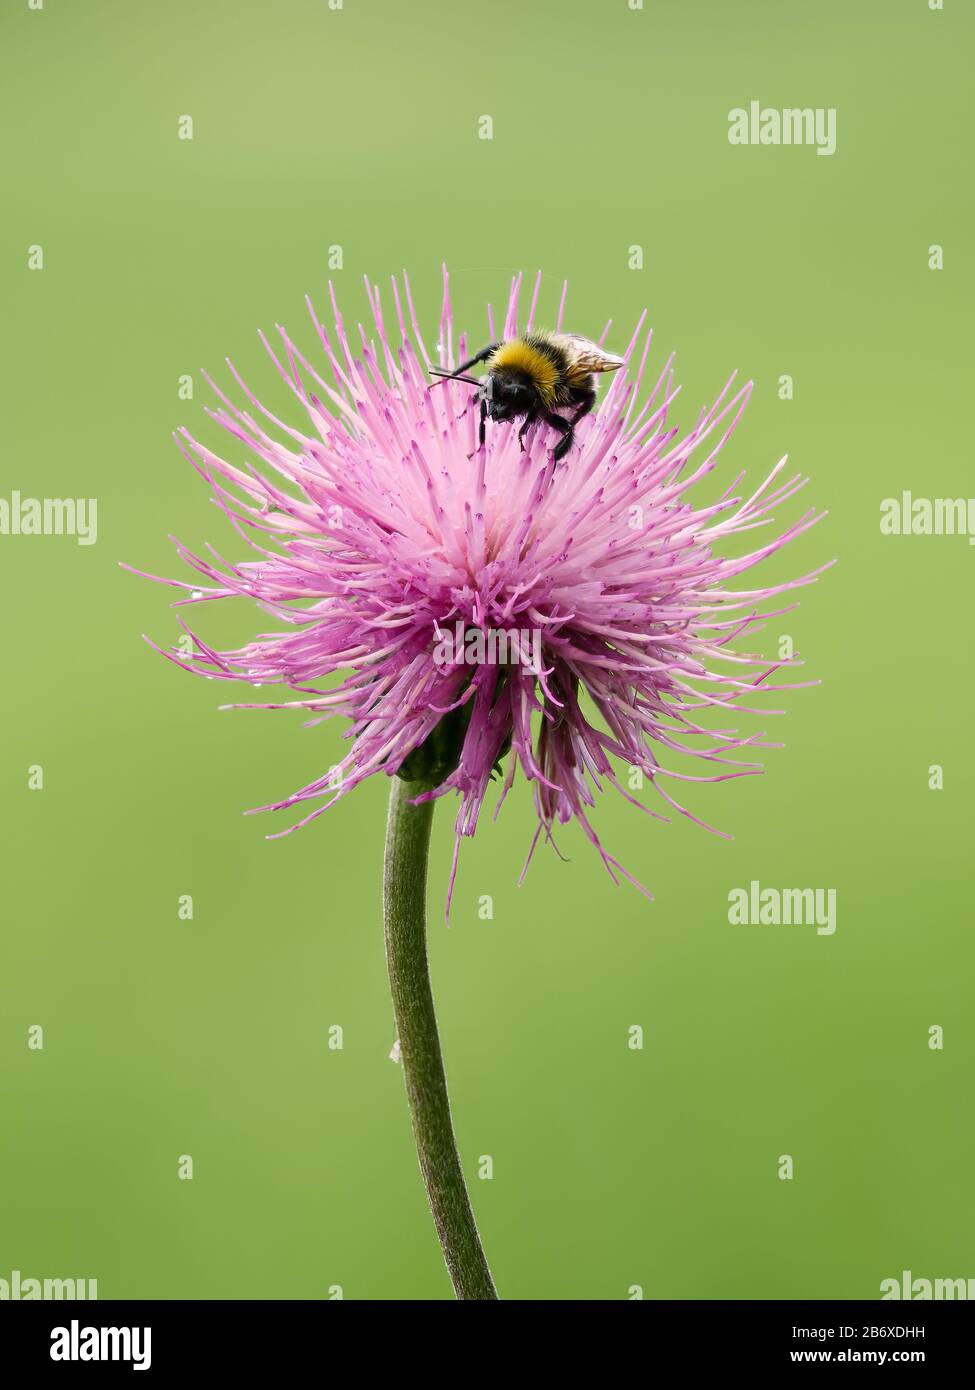 Bumblebee sucks nectar from the flower. Summer close up image of a hairy insect. Stock Photo